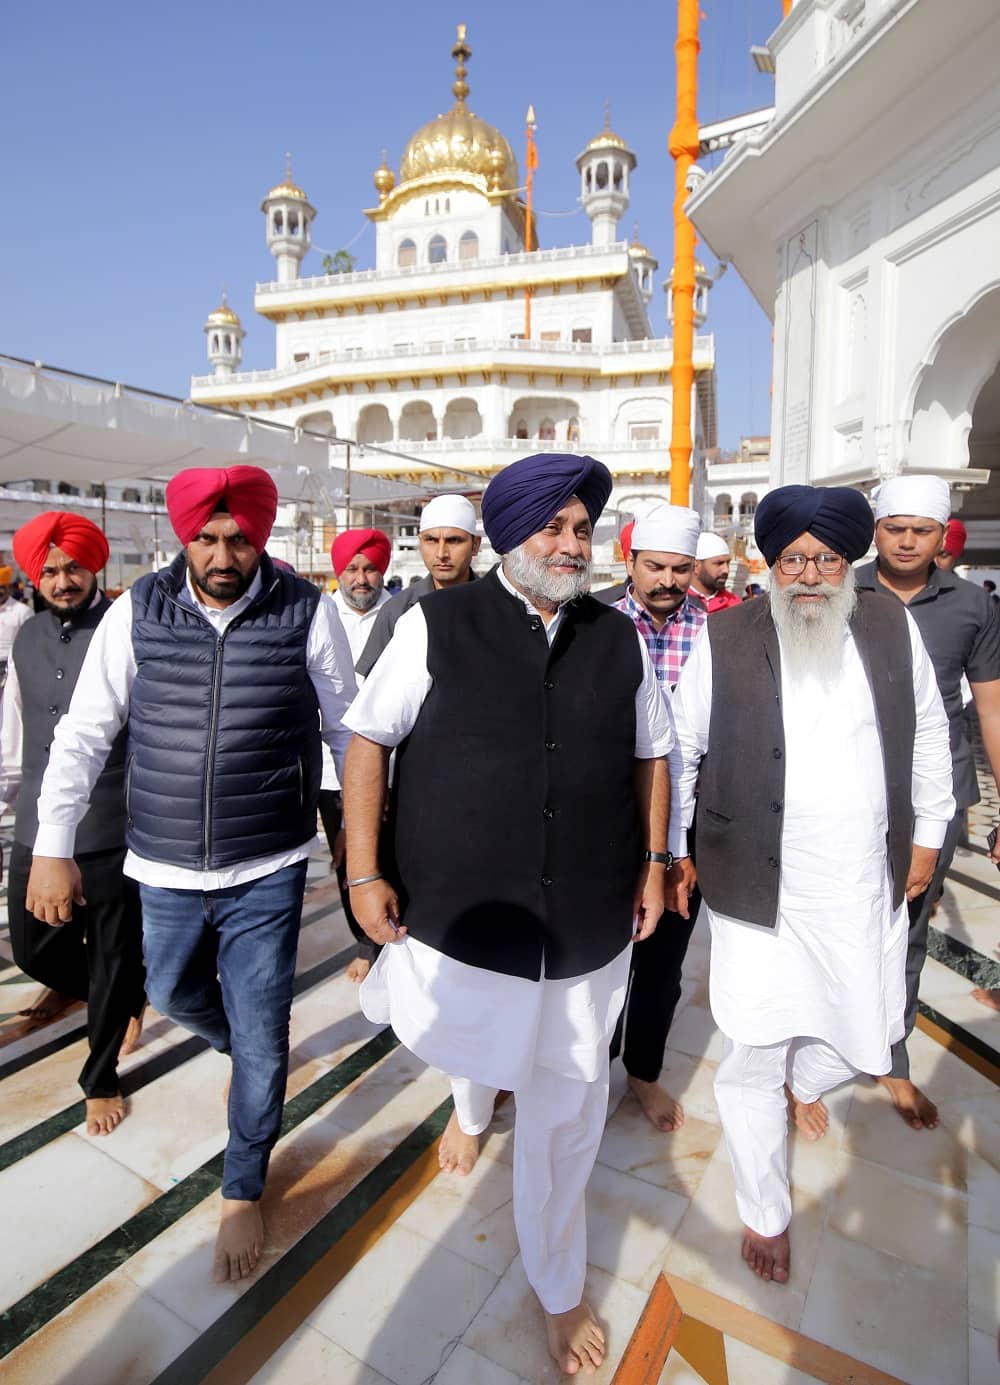 Sukhbir Singh Badal arrives at Golden Temple aheag of vote counting day